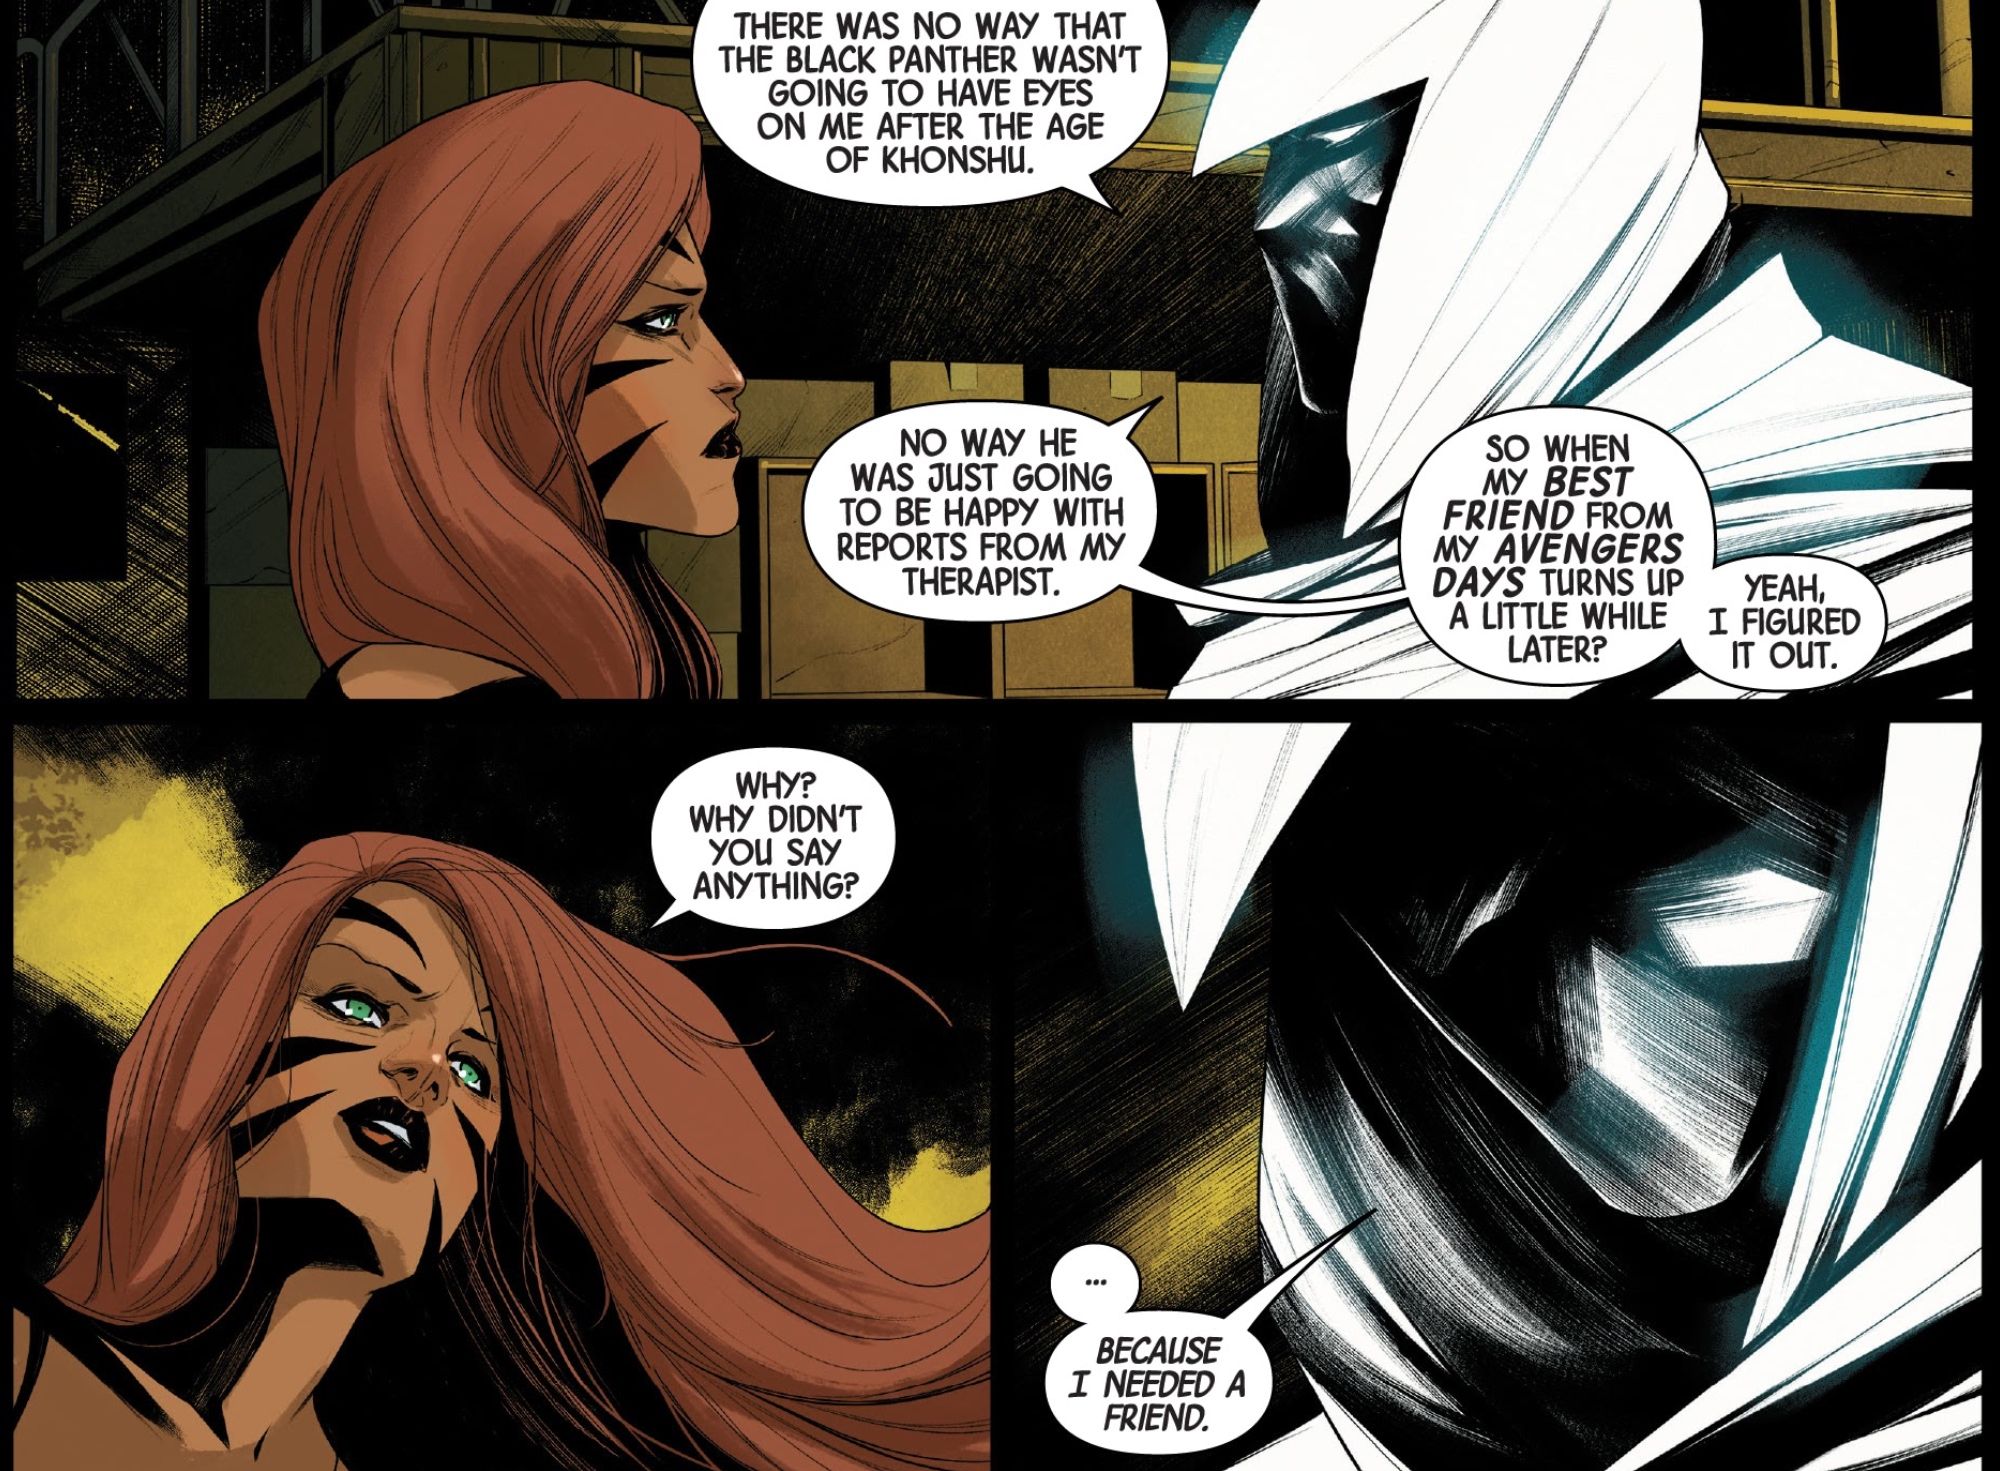 Moon Knight Finally Admits His Greatest Weakness Isn’t What Fans Think